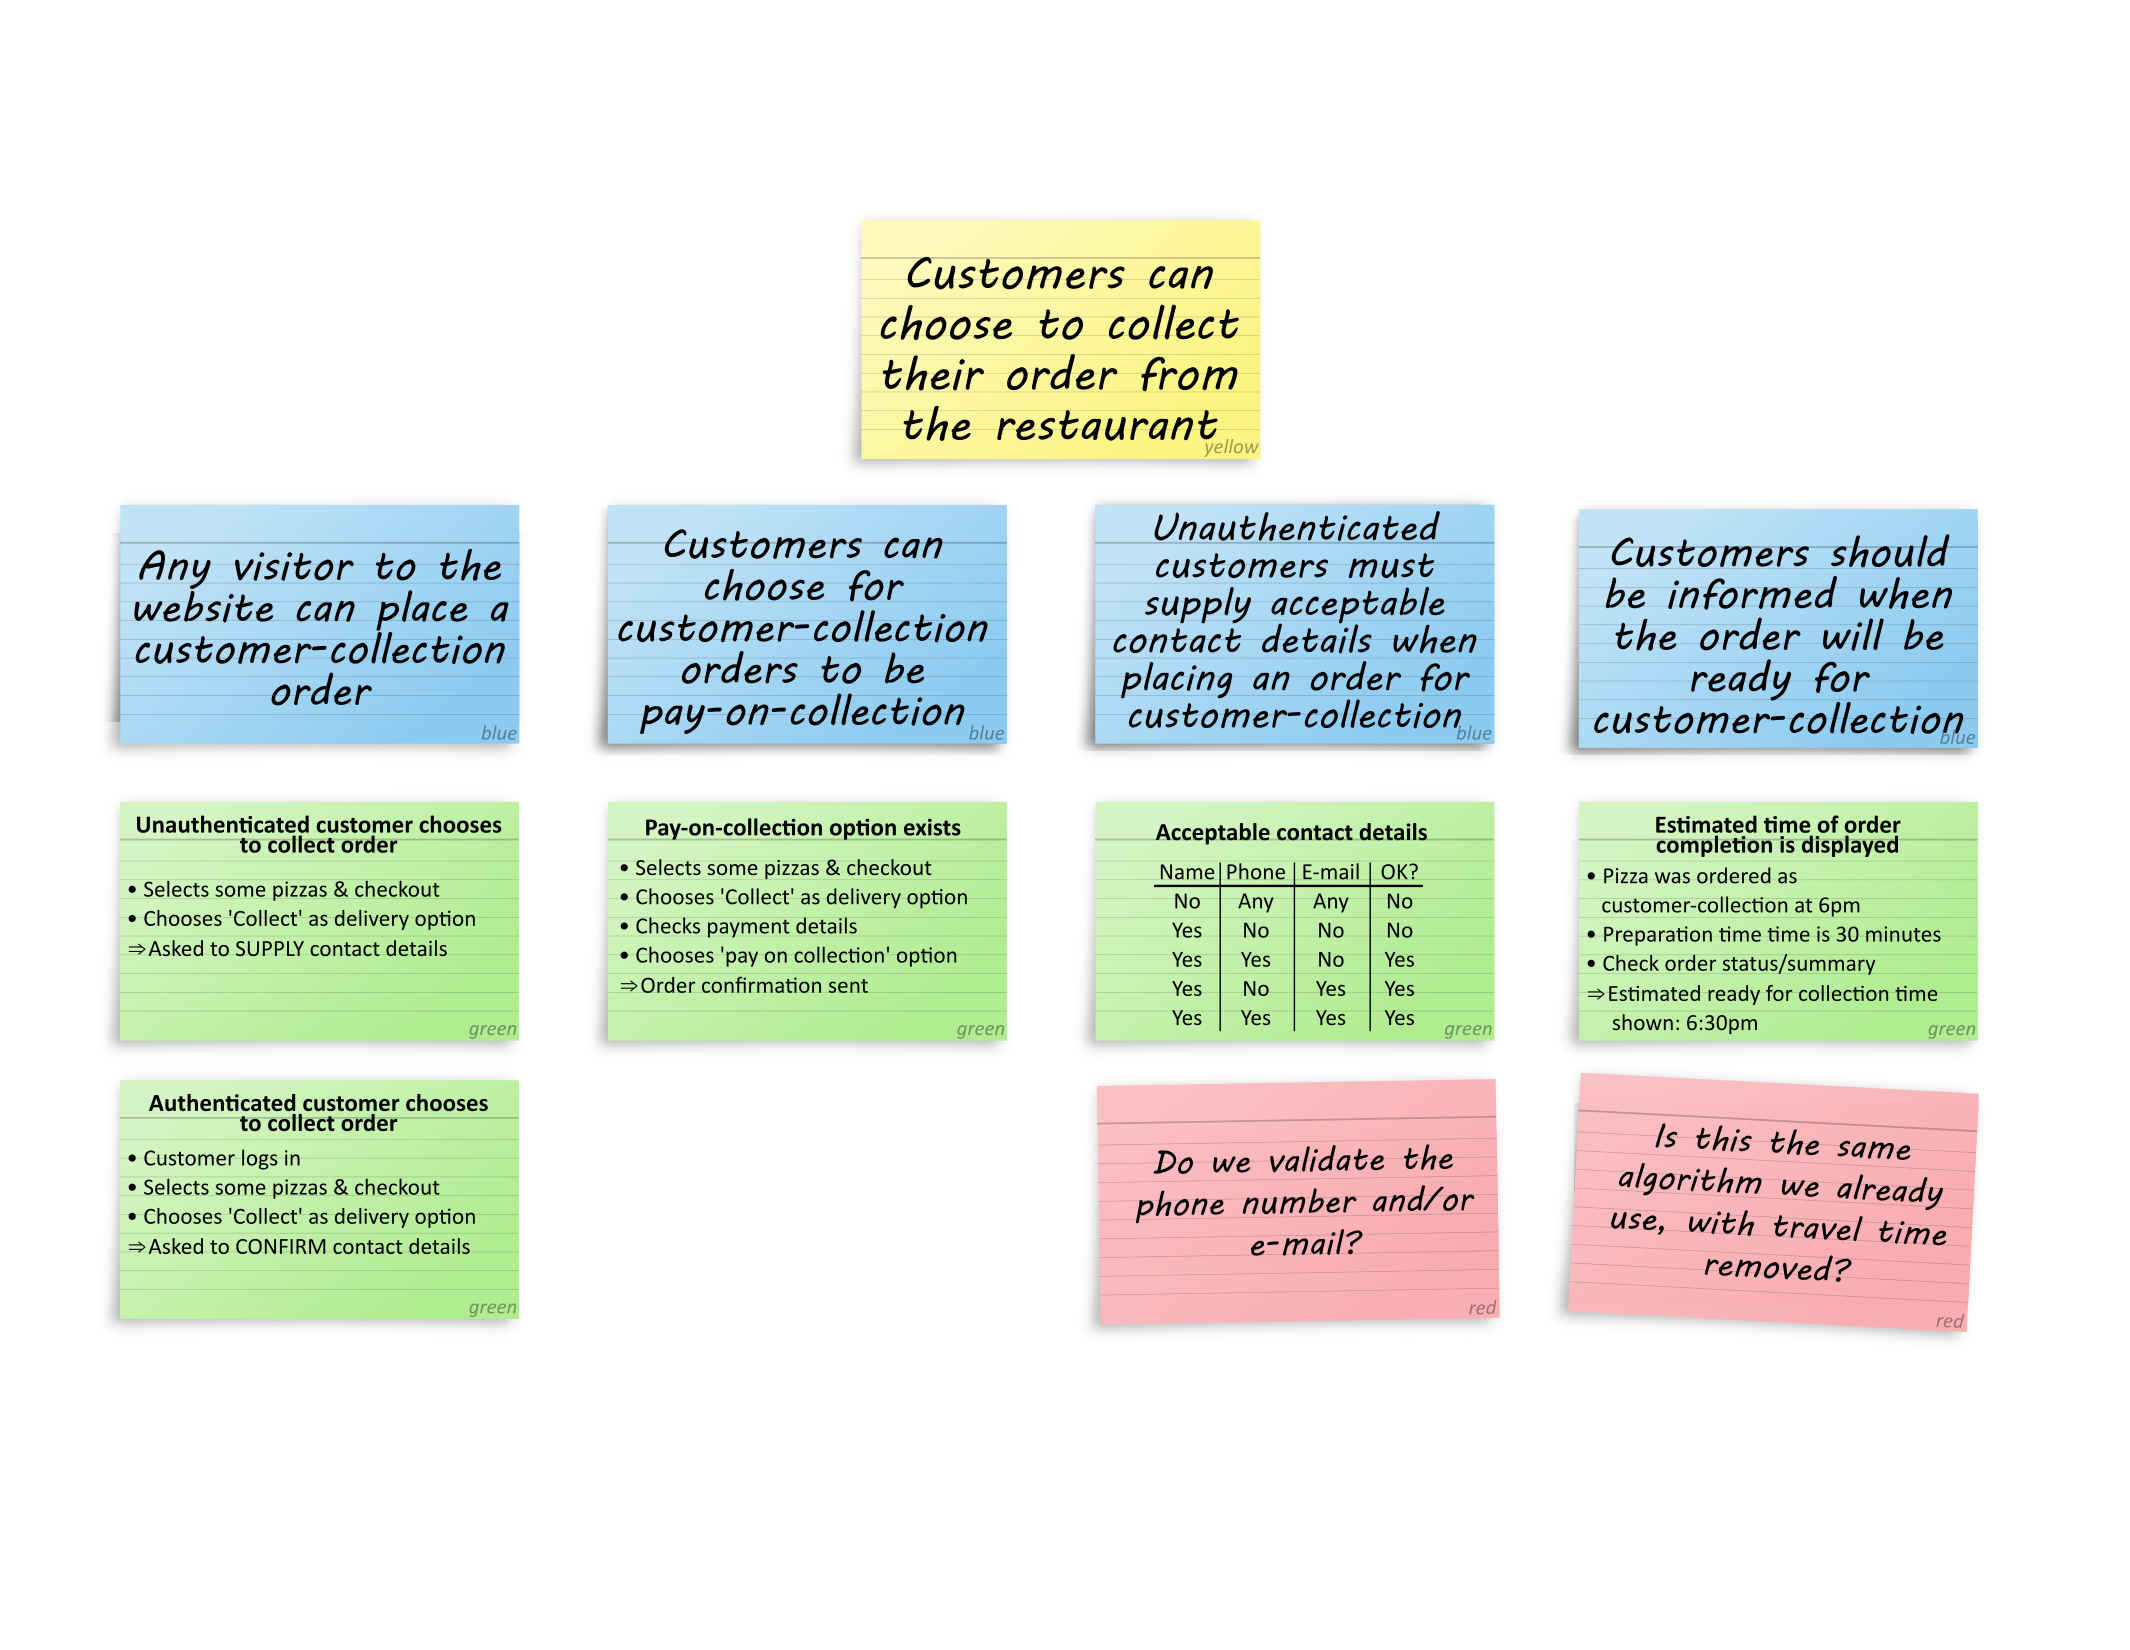 Customer-collection example map